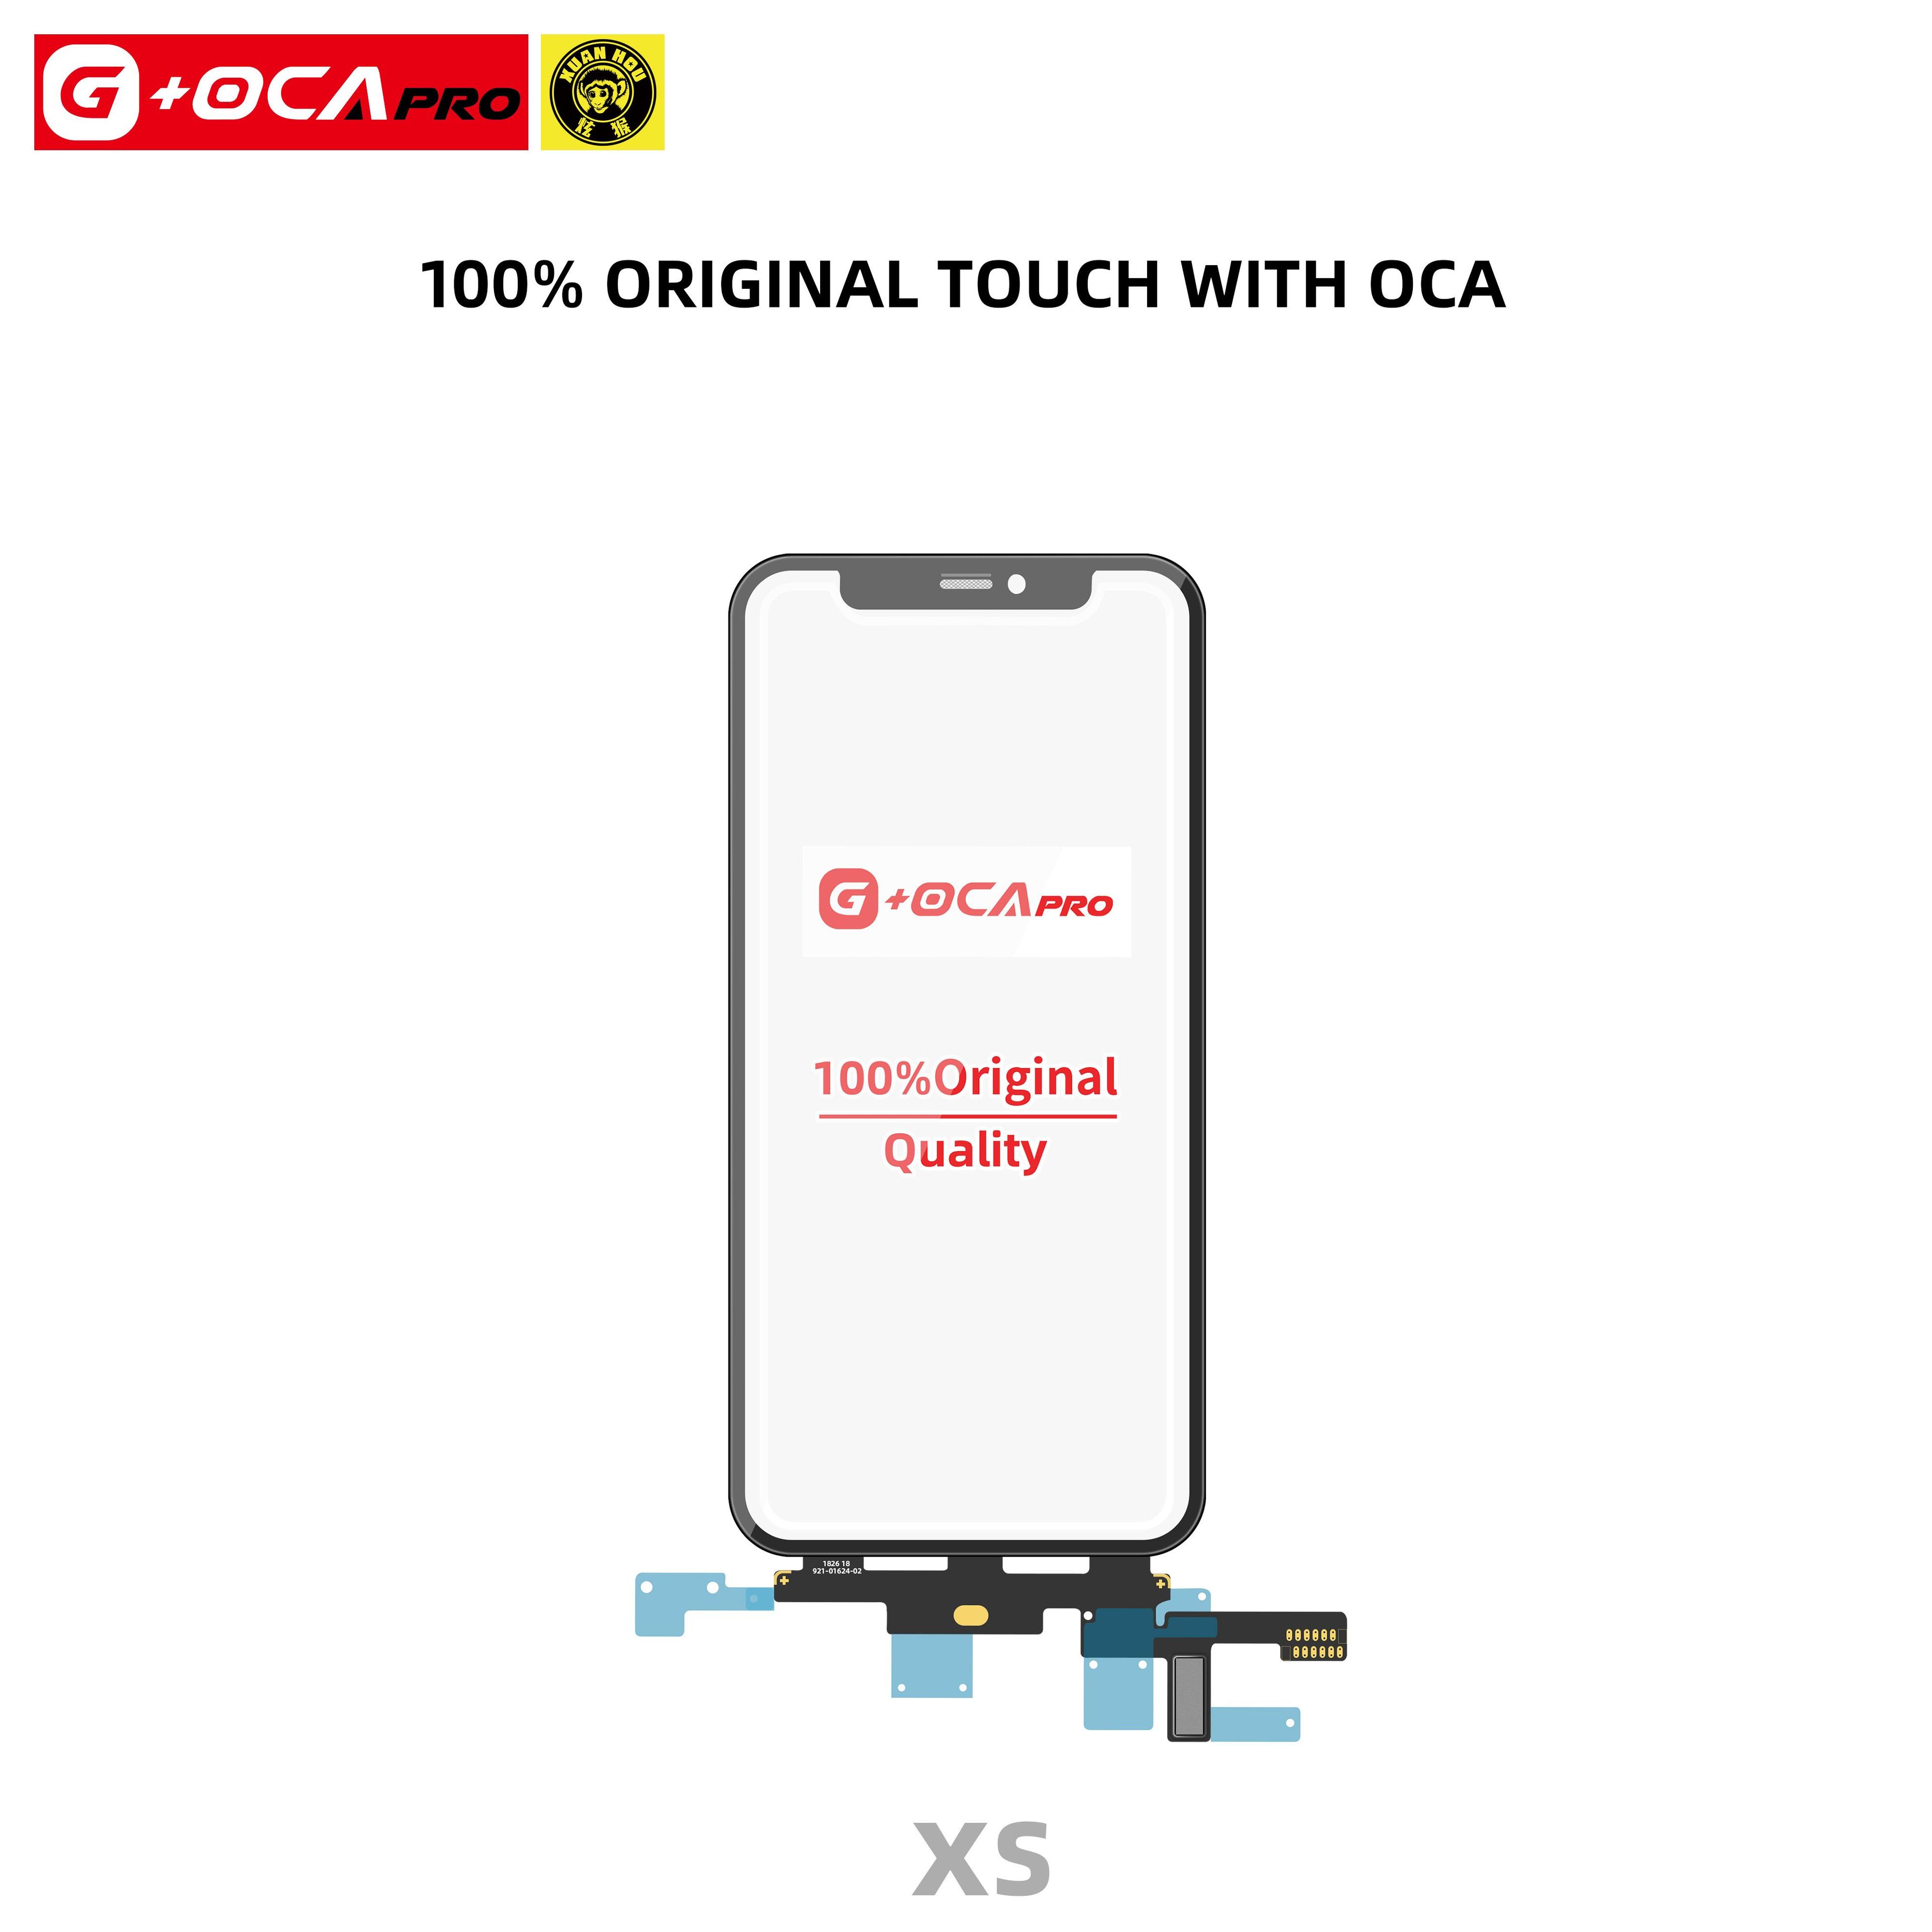 Touch Screen G + OCA Pro with original touch (with oleophobic cover) iPhone Xs